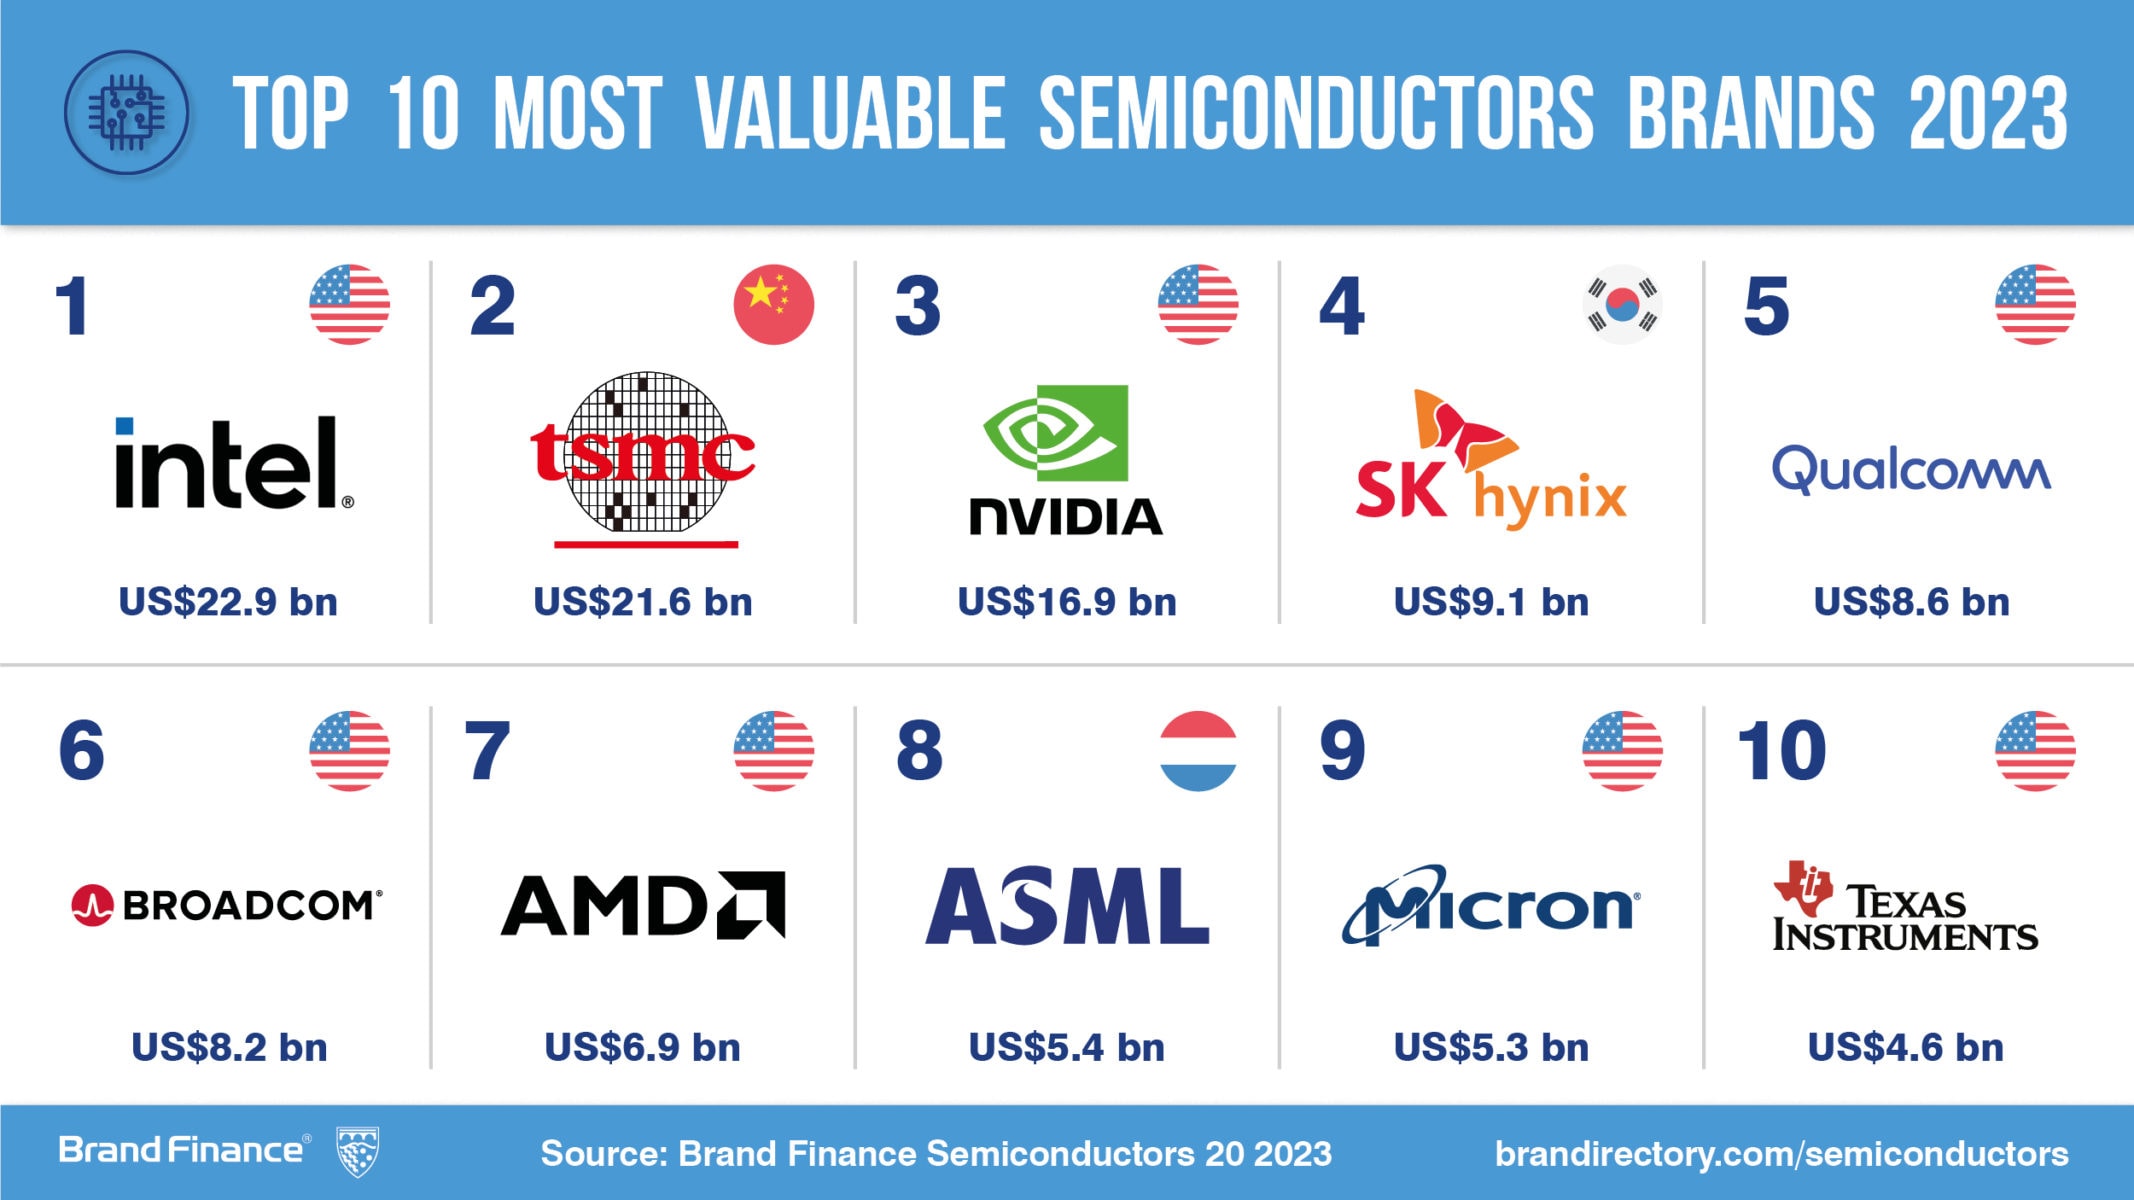 TSMC challenges Intel for most valuable semiconductor brand title